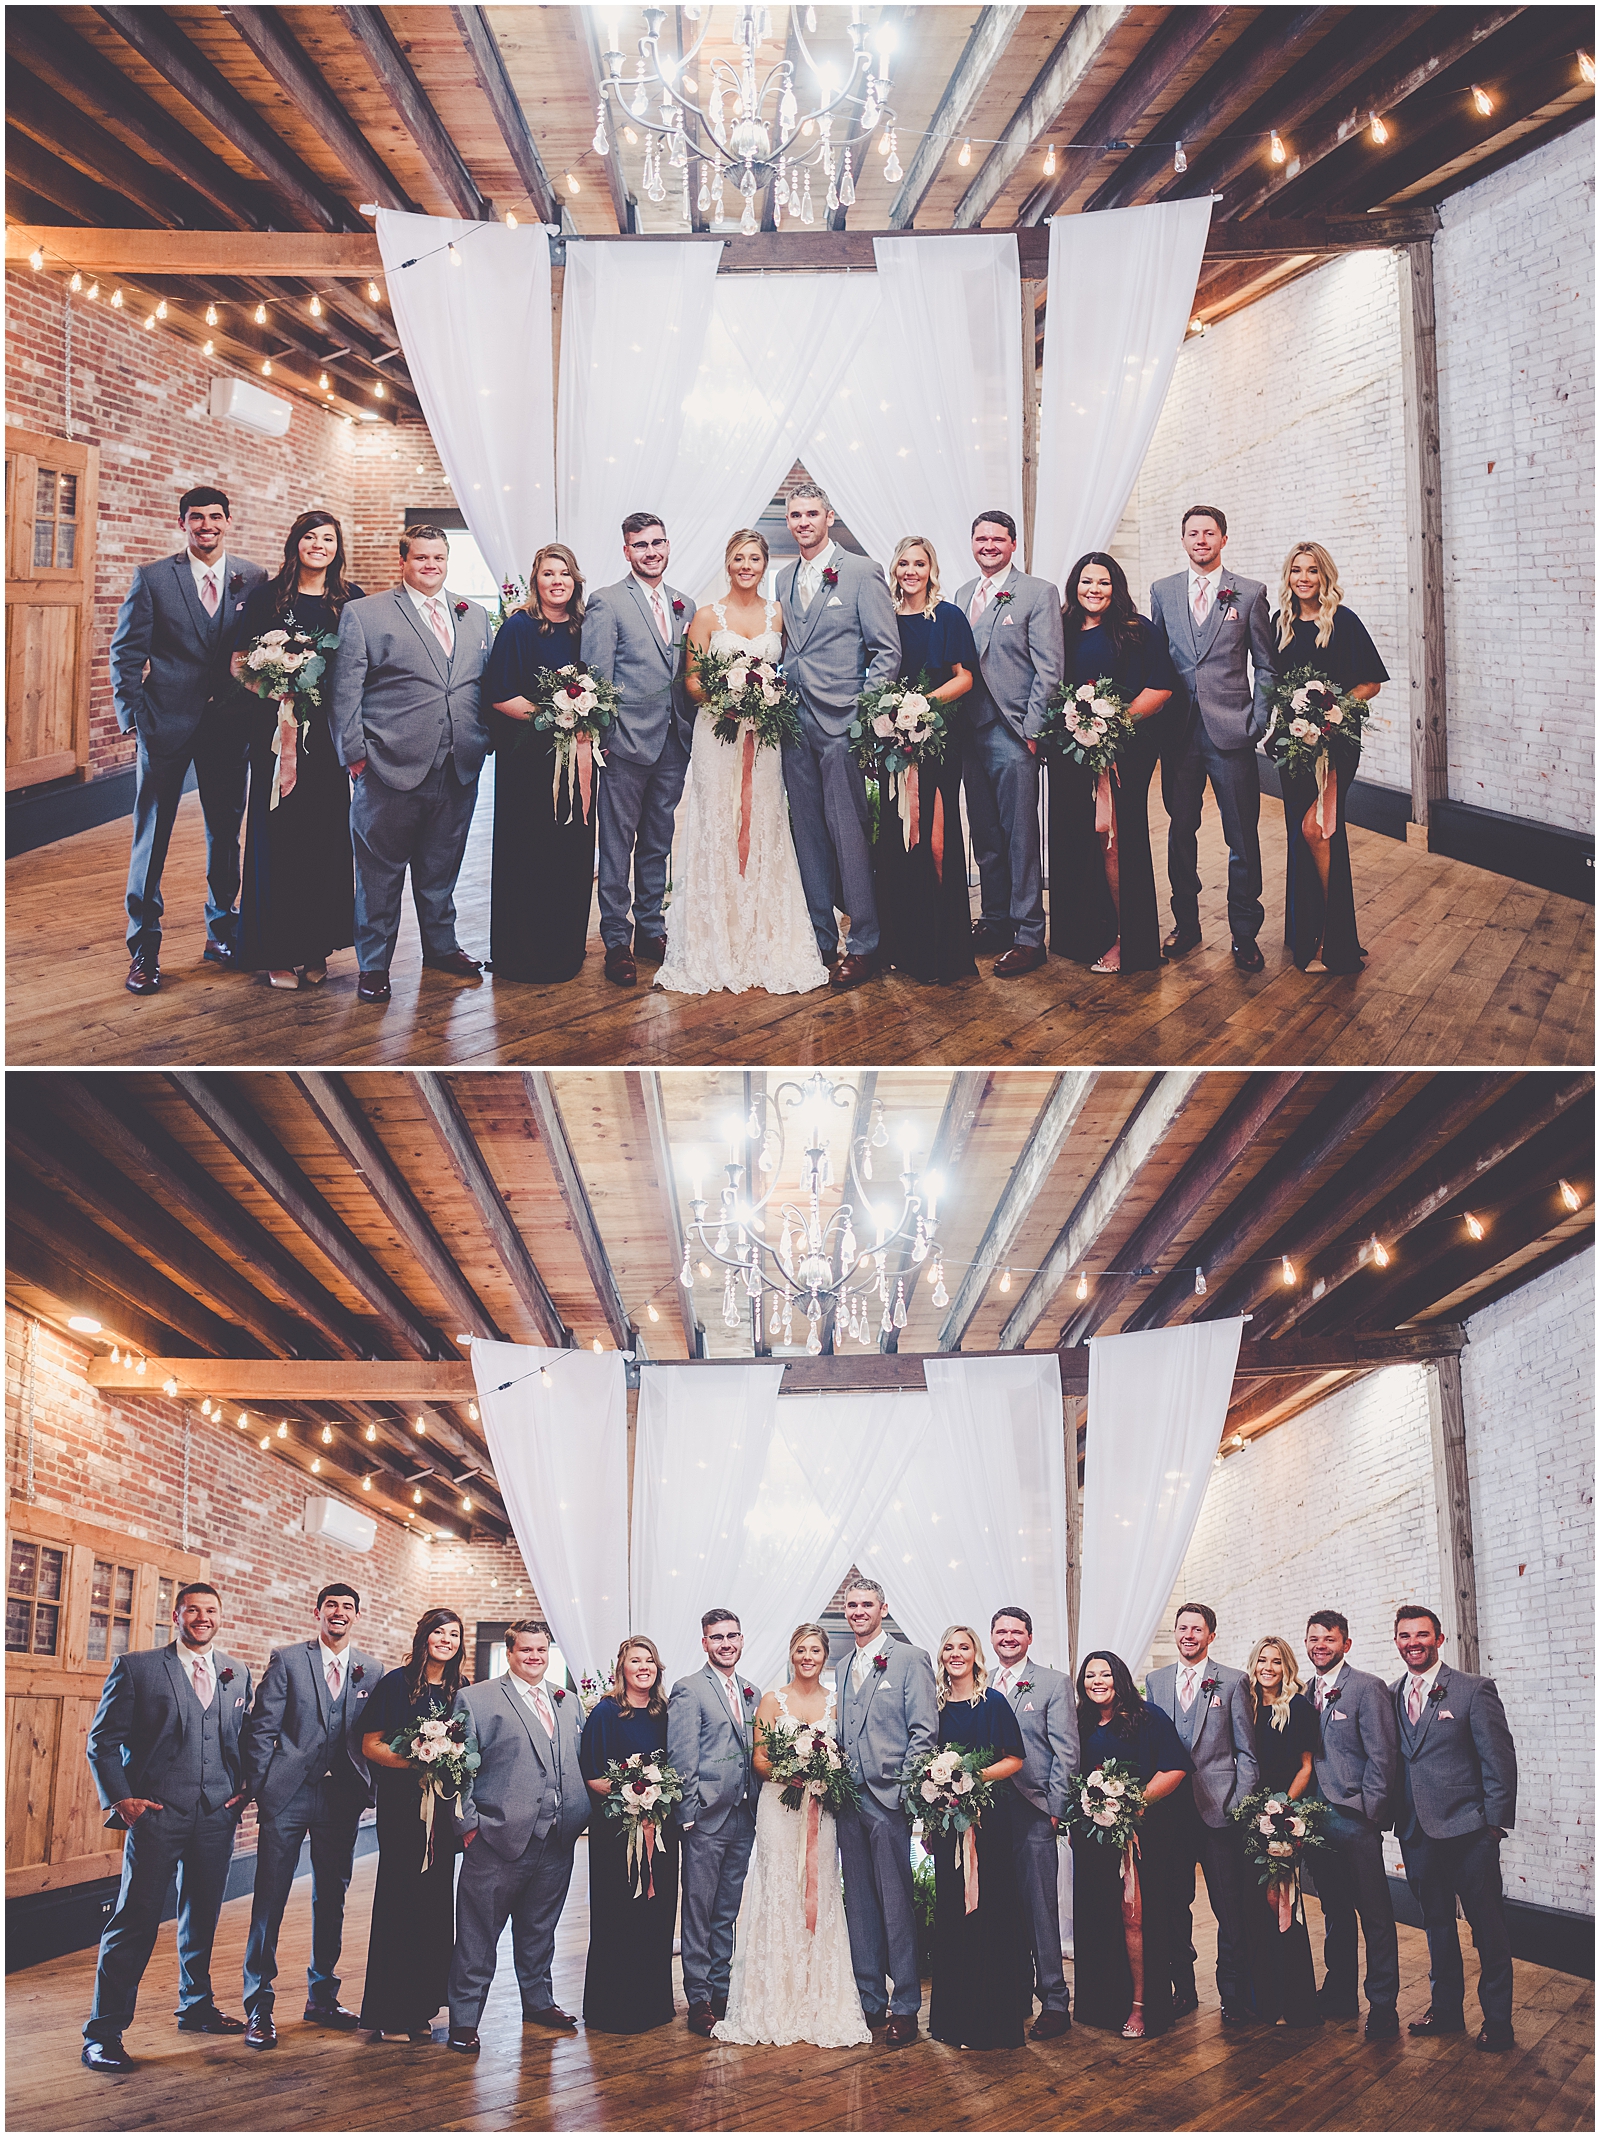 Kendra and Cole's rainy rustic navy & blush wedding at Town & Country Events in Milford, IL with Chicagoland wedding photographer Kara Evans Photographer.